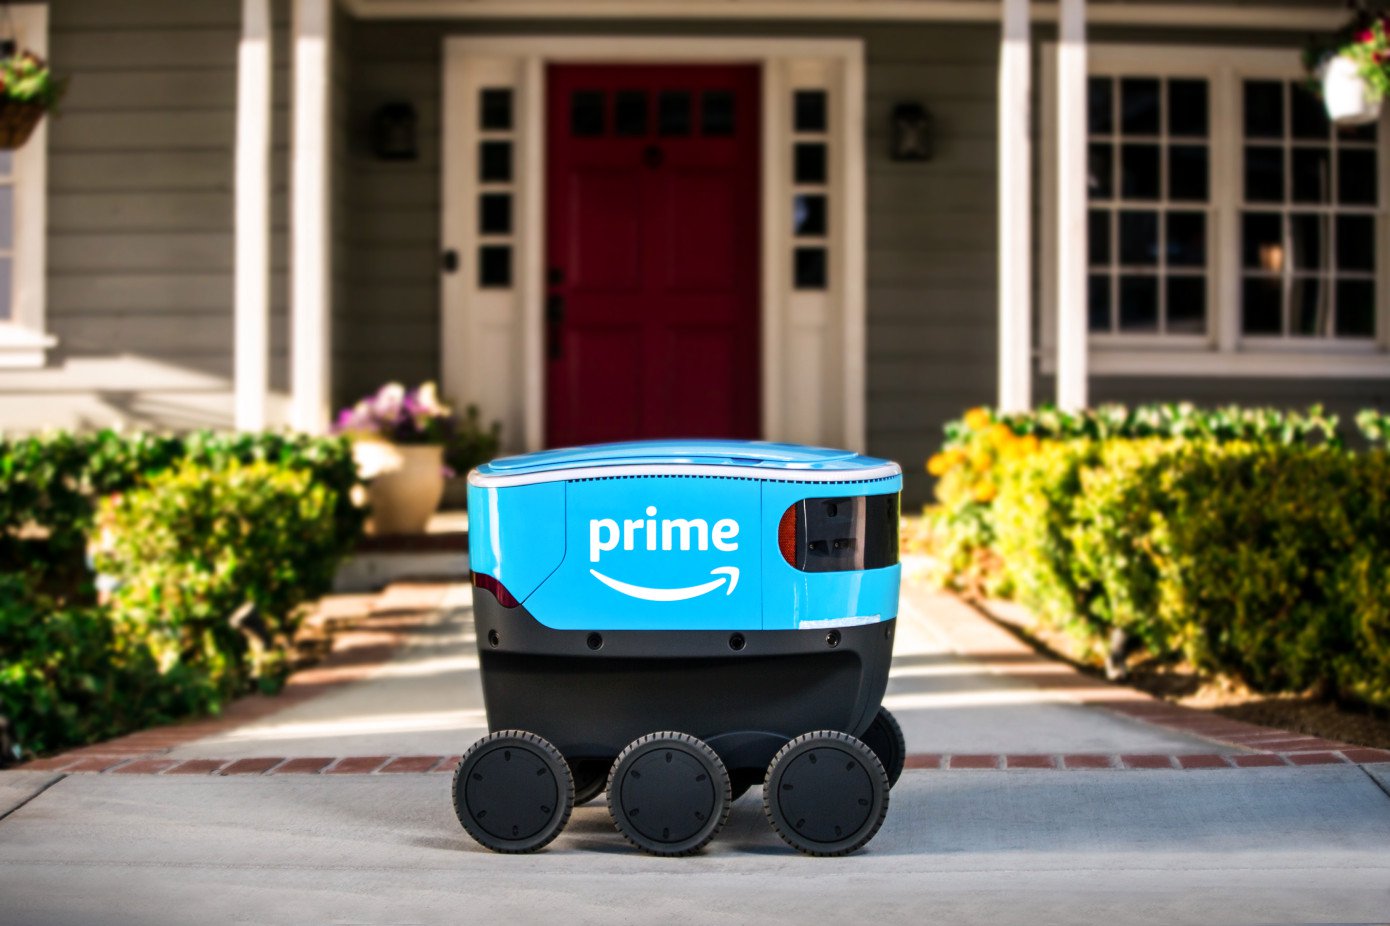 Amazon began field-testing their robots-the delivery guy, Scout